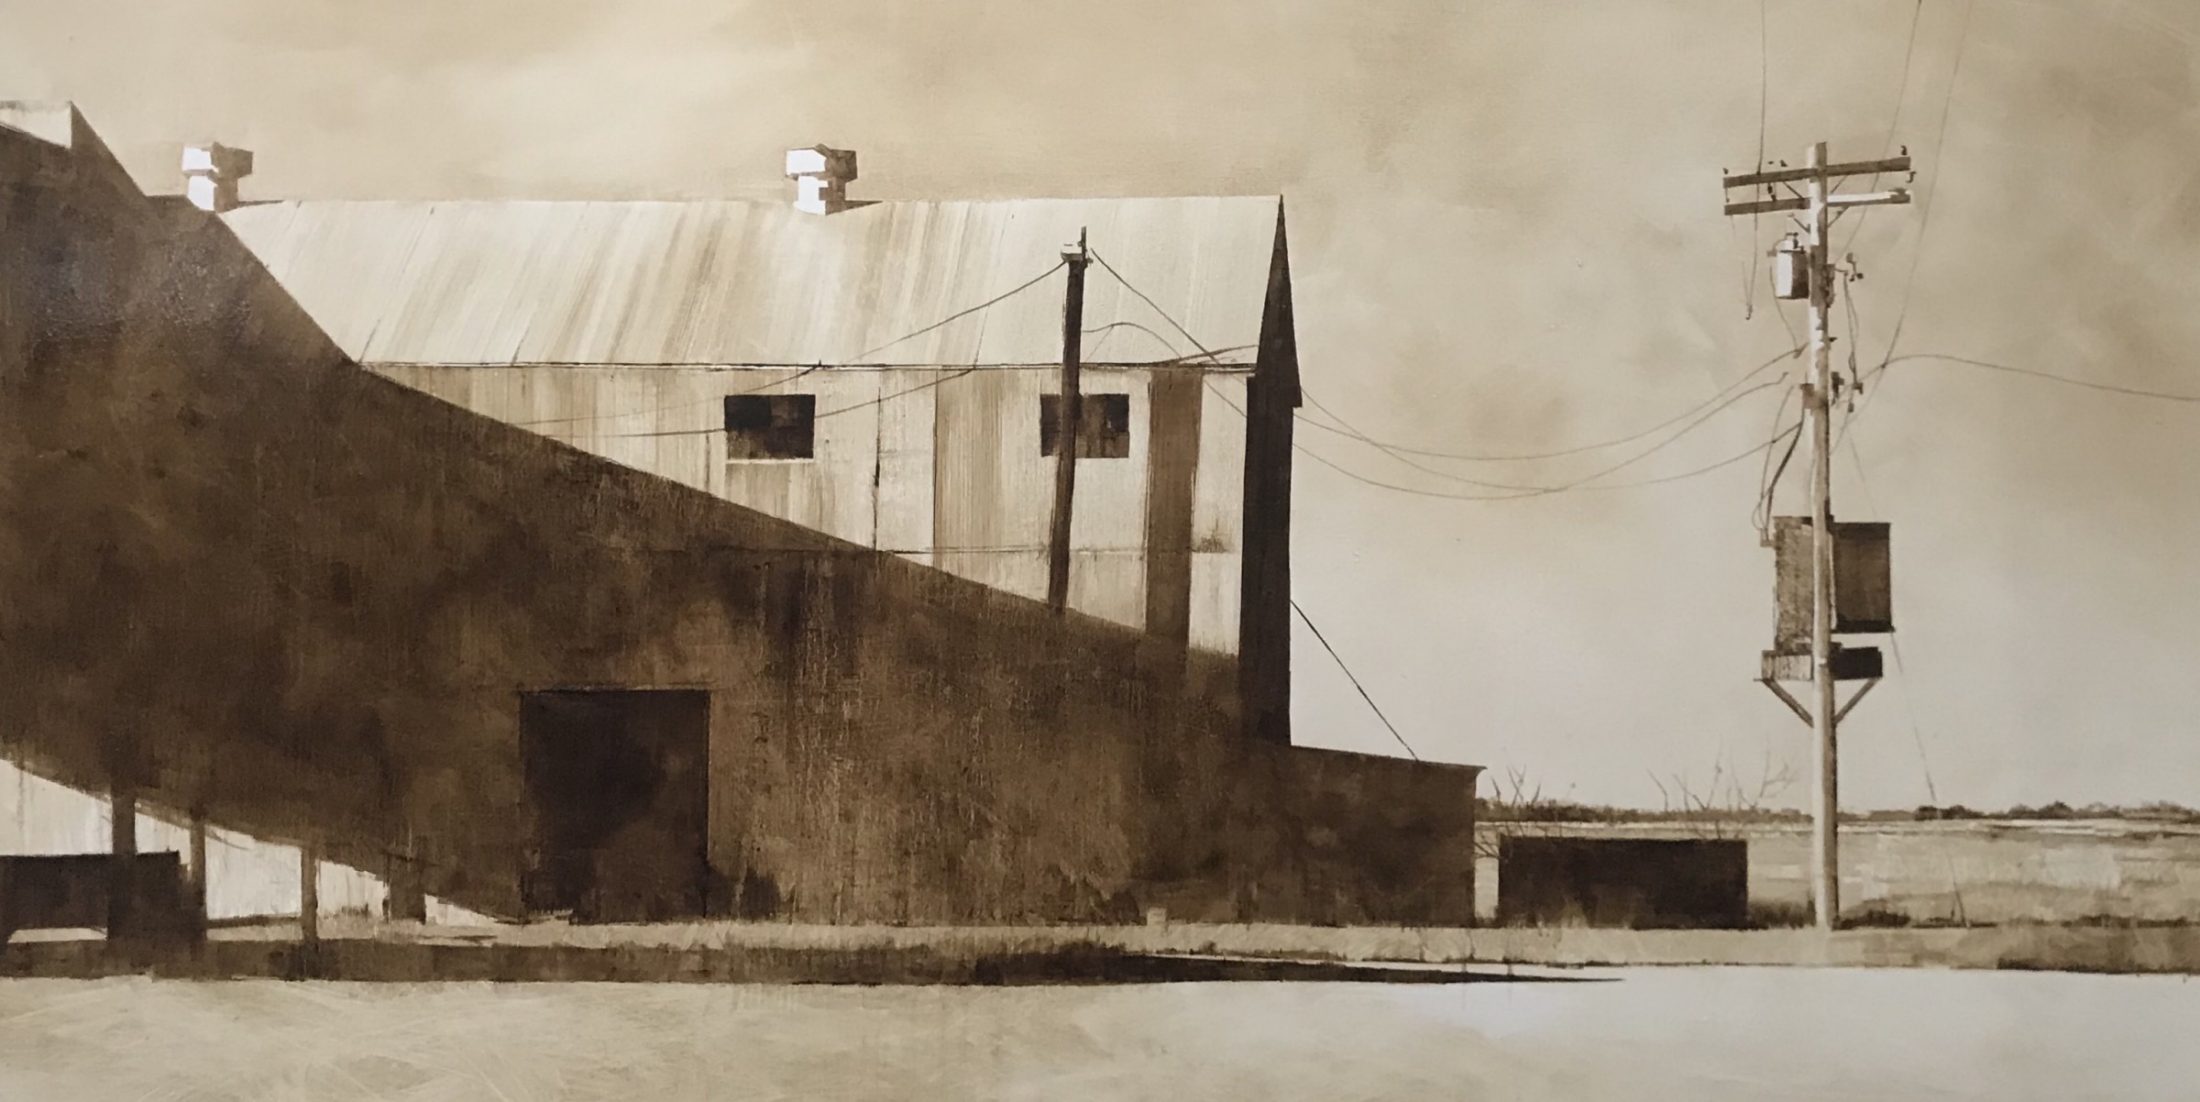 Oil painting of an old cotton gin by Charlie Hunter